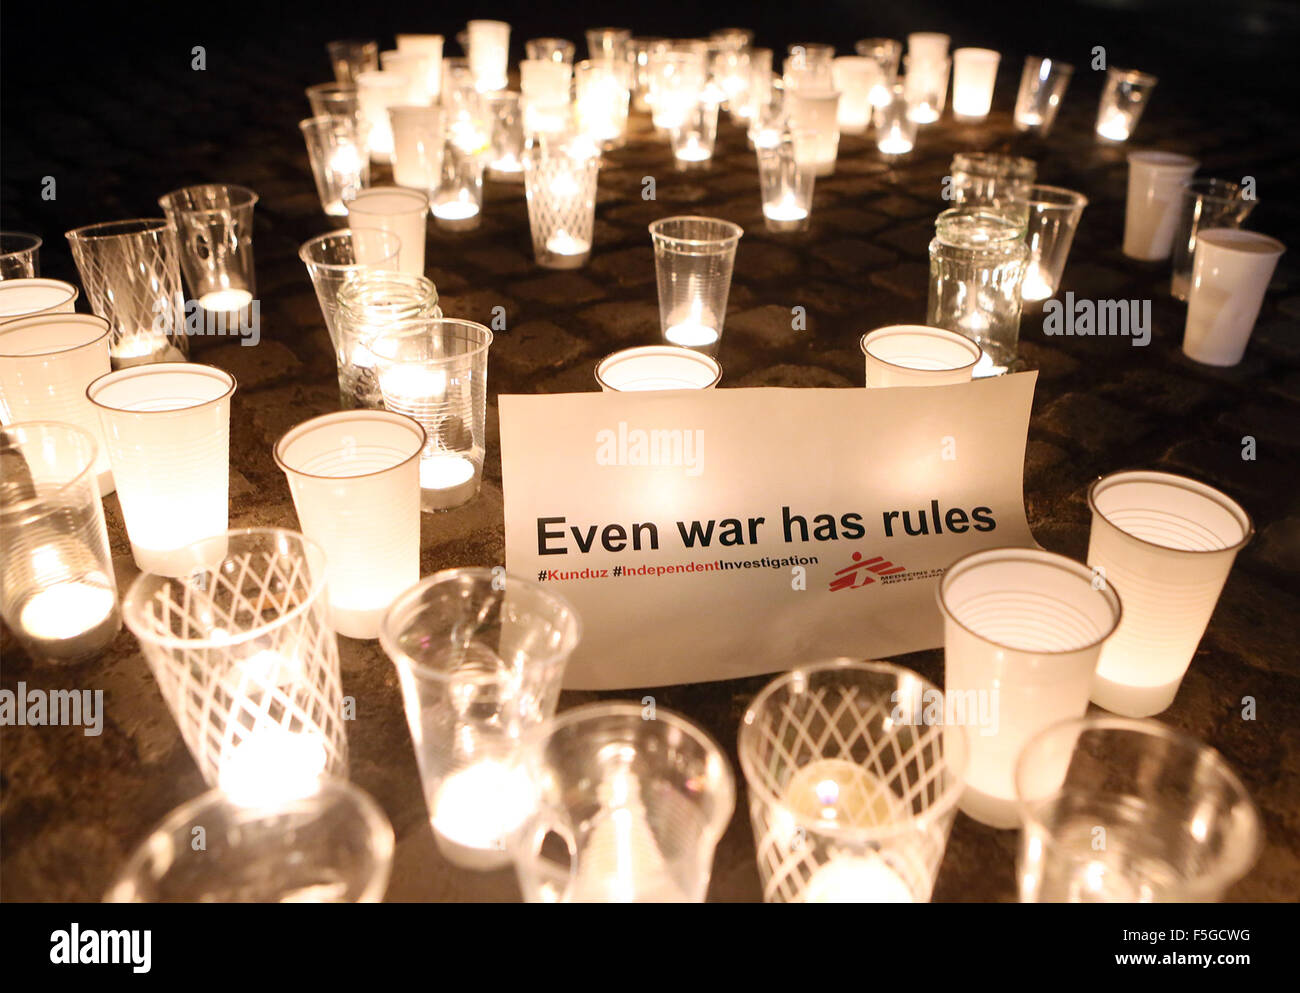 HANDOUT - A Handout datedd 3 November 2015 shows candles burning outside the Reichstag in Berlin, Germany. They are burning as part of a memorial event of the international organisation Doctors without Borders, in the background a banner reads 'Even war has rules'.   A month after the attack on the Doctors without Borderds hospital in the northern Afghan city of Kunduz, organisers among the victims reiterated demand for an independent investigation. Photo:Stephanie Pilick/Ärzte ohne Grenzen/dpa      ATTENTION MUST BE USED WITH MANADATORY CREDIT: Stephanie Pilick/Ärzte ohne Grenzen/dpa Stock Photo